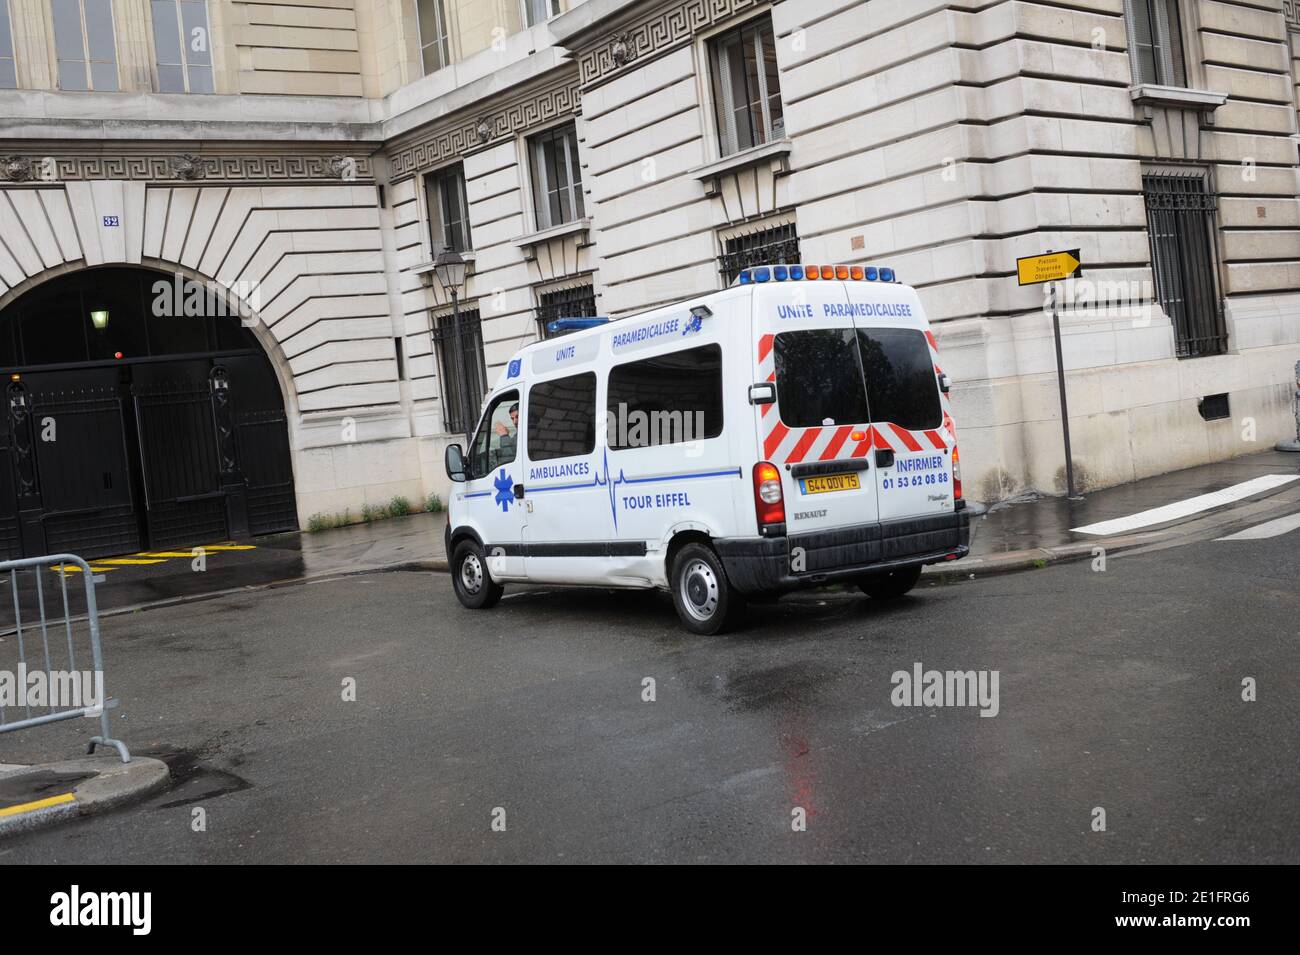 View of ambulance where German cardiologist Dieter Krombach will leave the Palais de Justice after the first day of his trial for the murder of Kalinka Bamberski, in Paris, France on March 29, 2011. The German doctor is accused of having raped and killed his then 14-year-old stepdaughter, Kalinka Bamberski, in the summer of 1982 while she was holidaying with her mother at Krombach's home at Lake Constance, southern Germany. A court in Germany ruled that Krombach could not be held responsible for the death, but in 1995 a court in Paris found the doctor guilty of manslaughter and sentenced him i Stock Photo